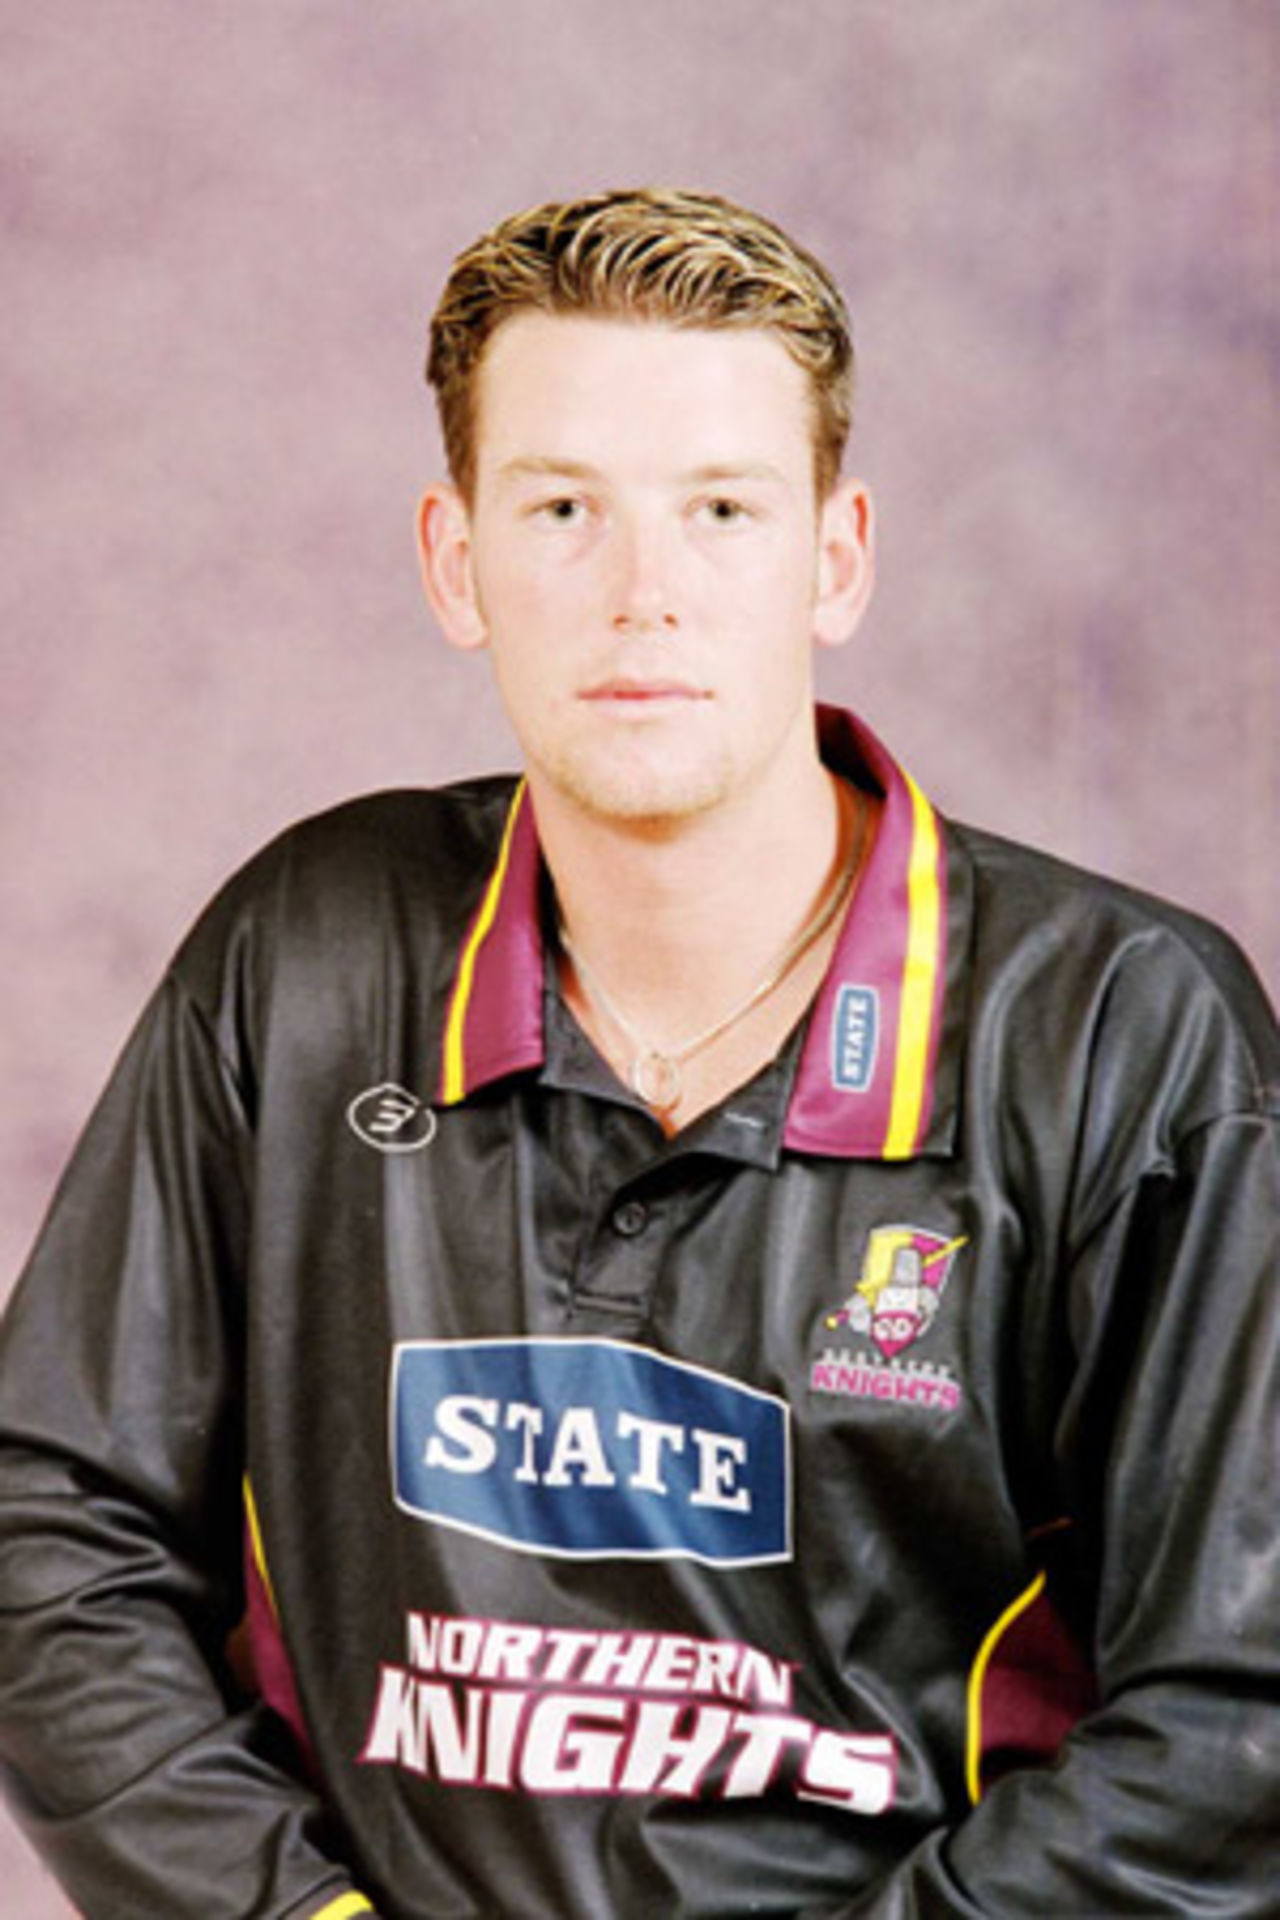 Portrait of Ian Butler, Northern Districts player in the 2001/02 season.